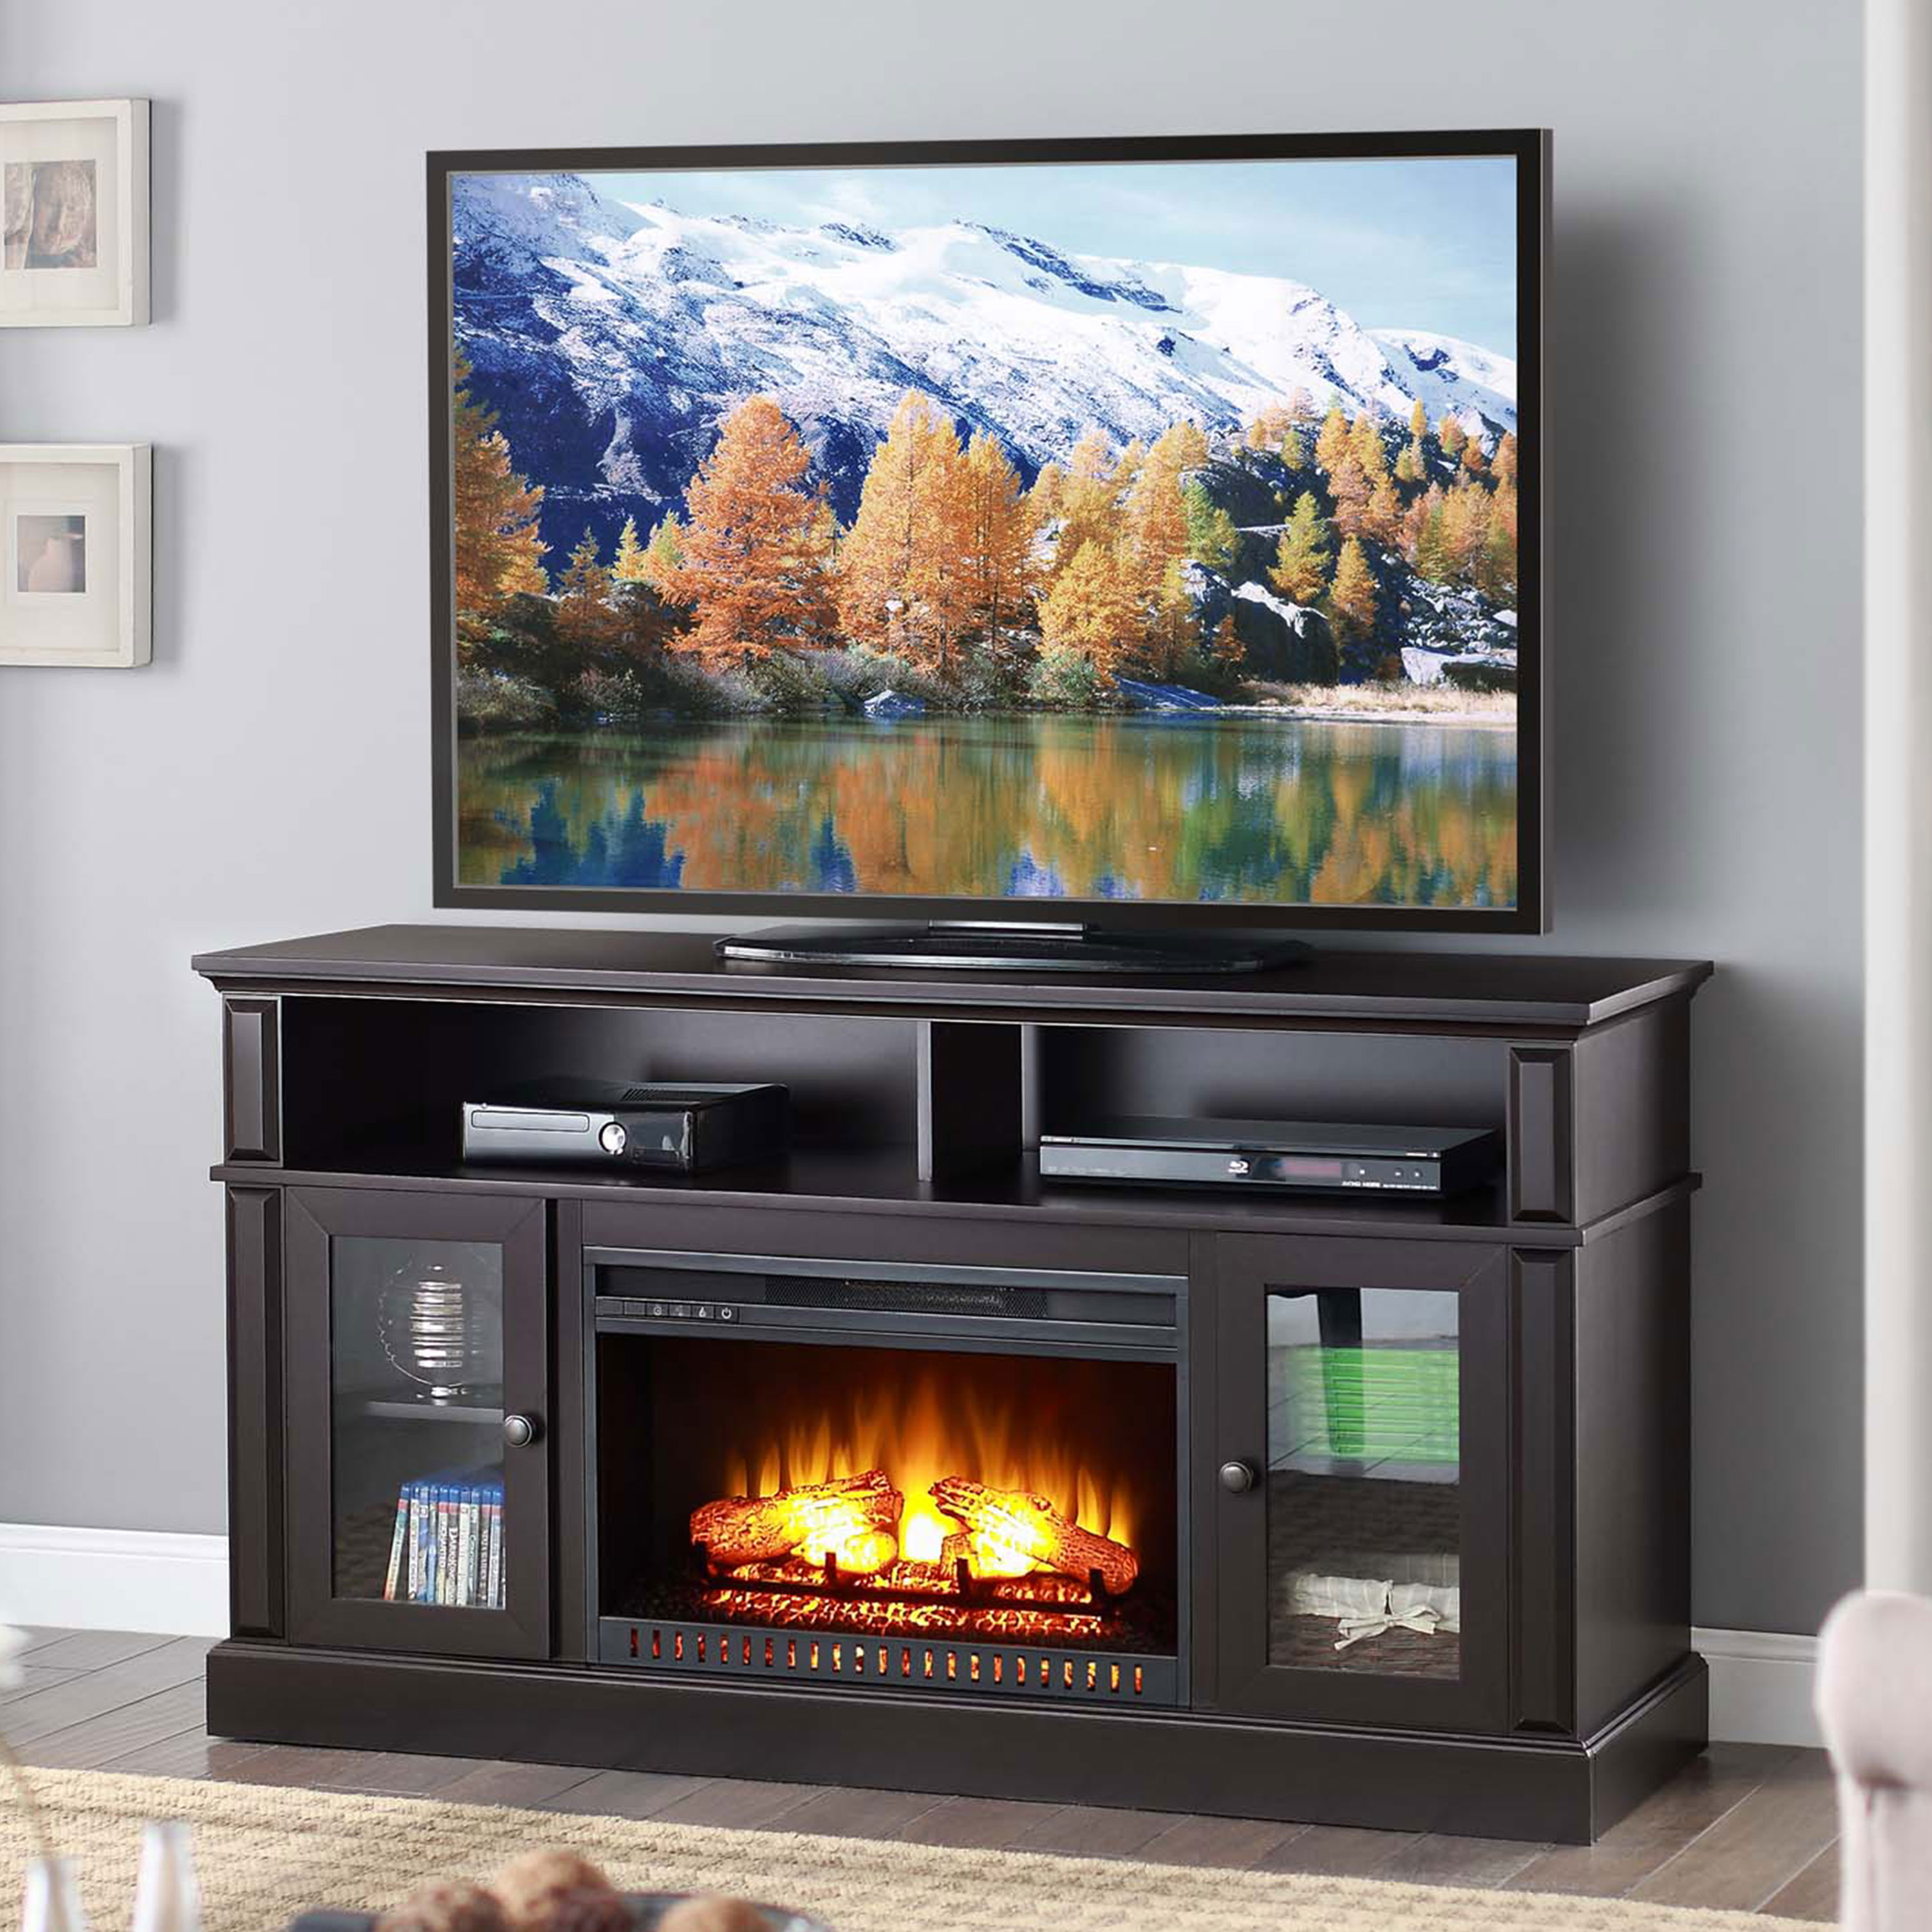 Farmhouse Entertainment Center with Fireplace New Whalen Barston Media Fireplace for Tv S Up to 70 Multiple Finishes